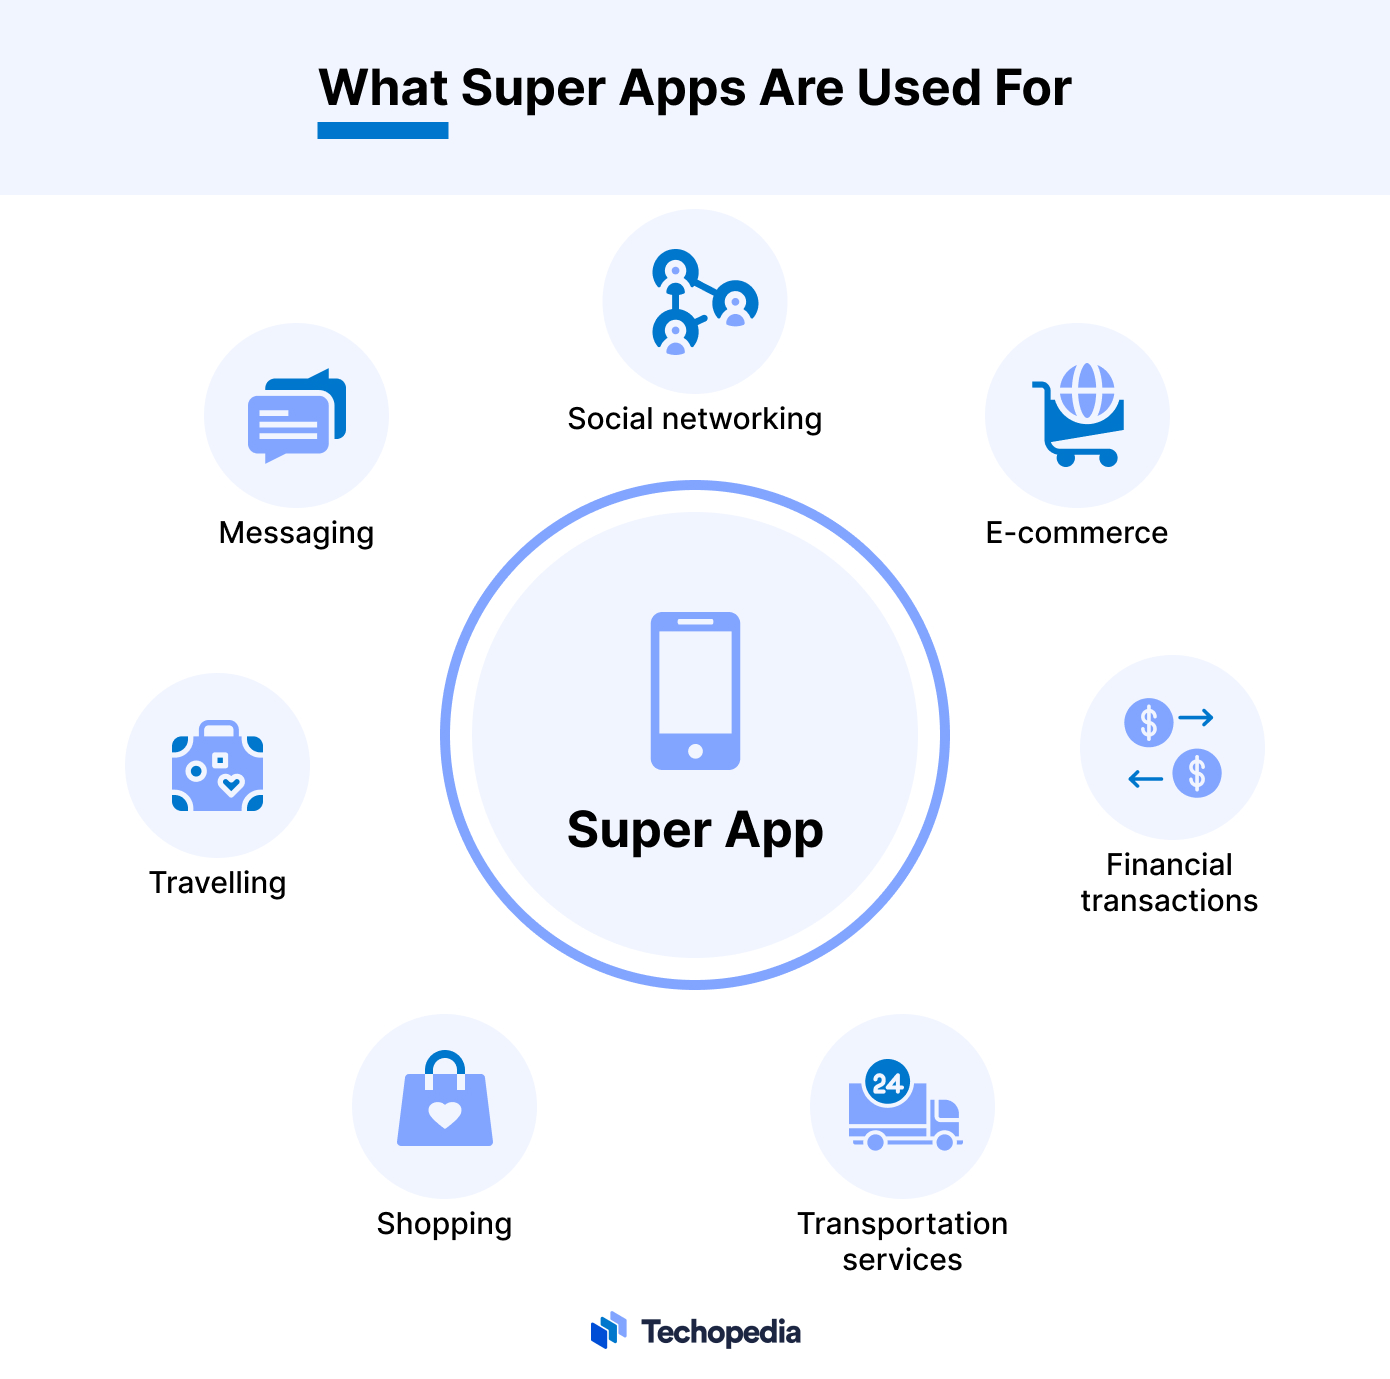 What Super Apps Are Used For